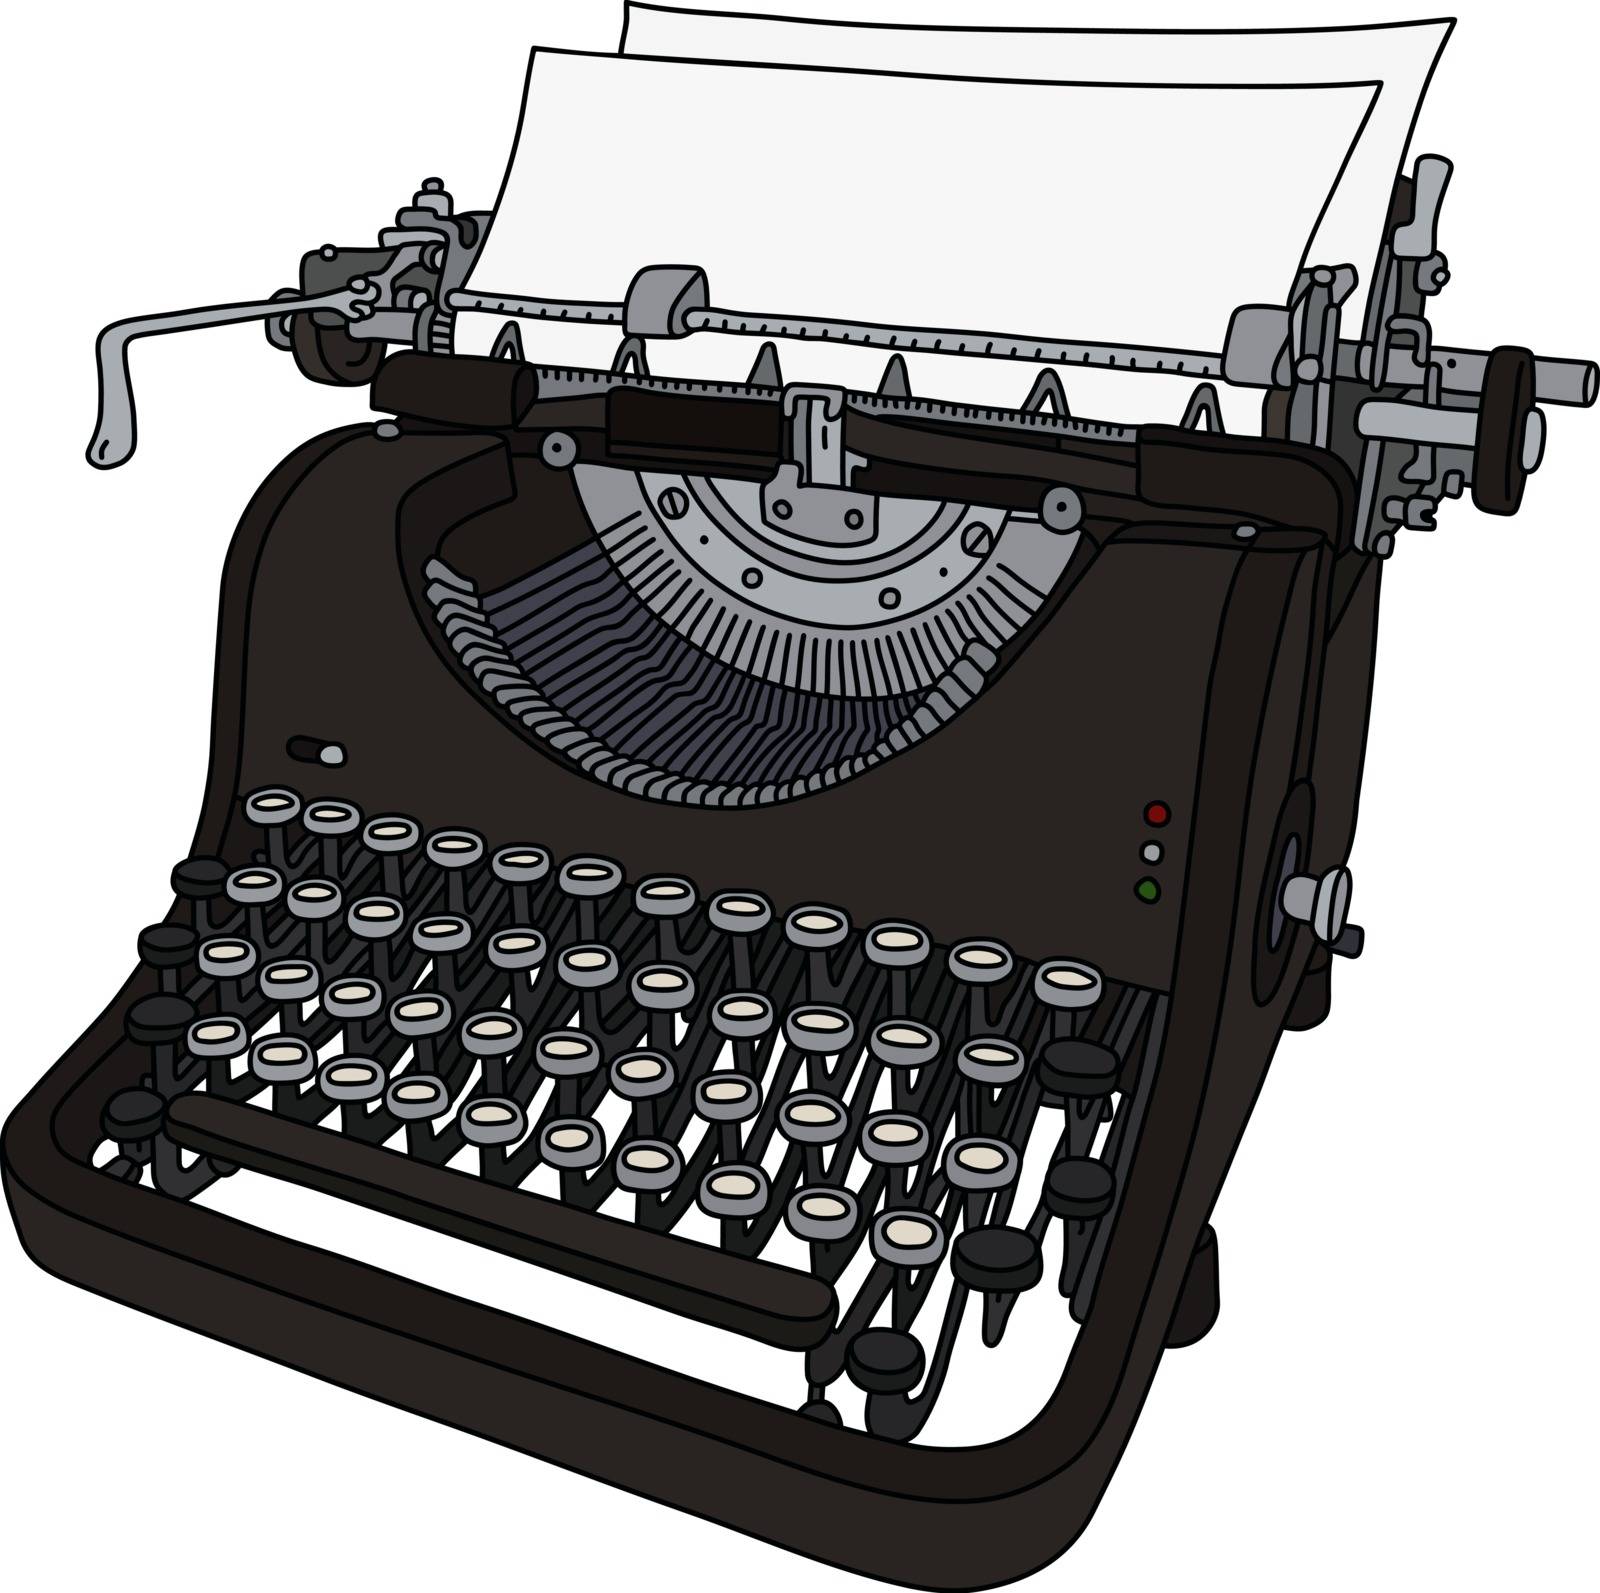 The vintage mechanical typewriter by vostal